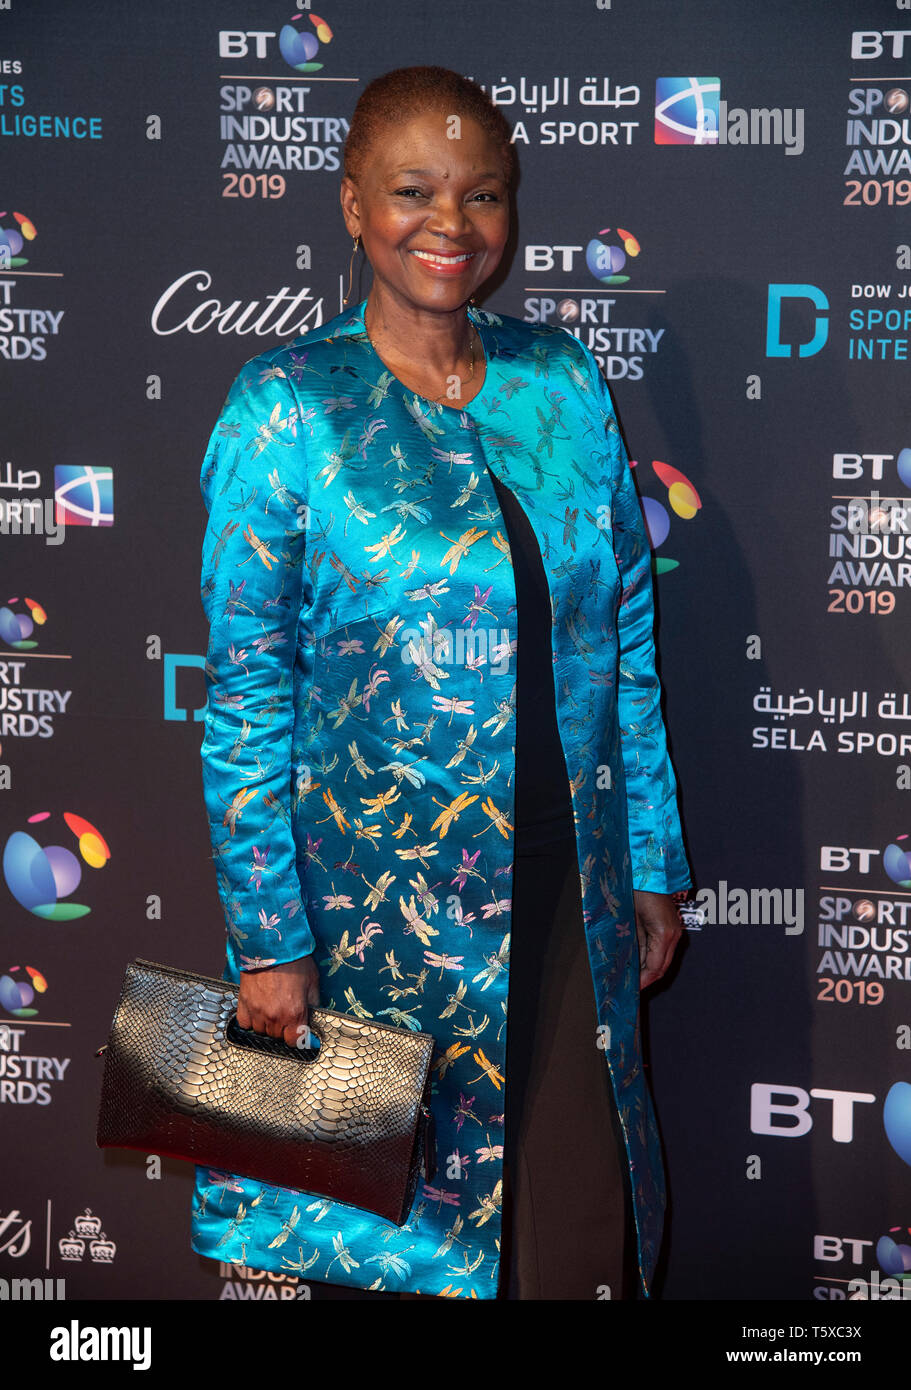 LONDON, ENGLAND - APRIL 25: Baroness Amos appears on the red carpet ahead of the BT Sport Industry Awards 2019 at Battersea Evolution on April 25, 201 Stock Photo